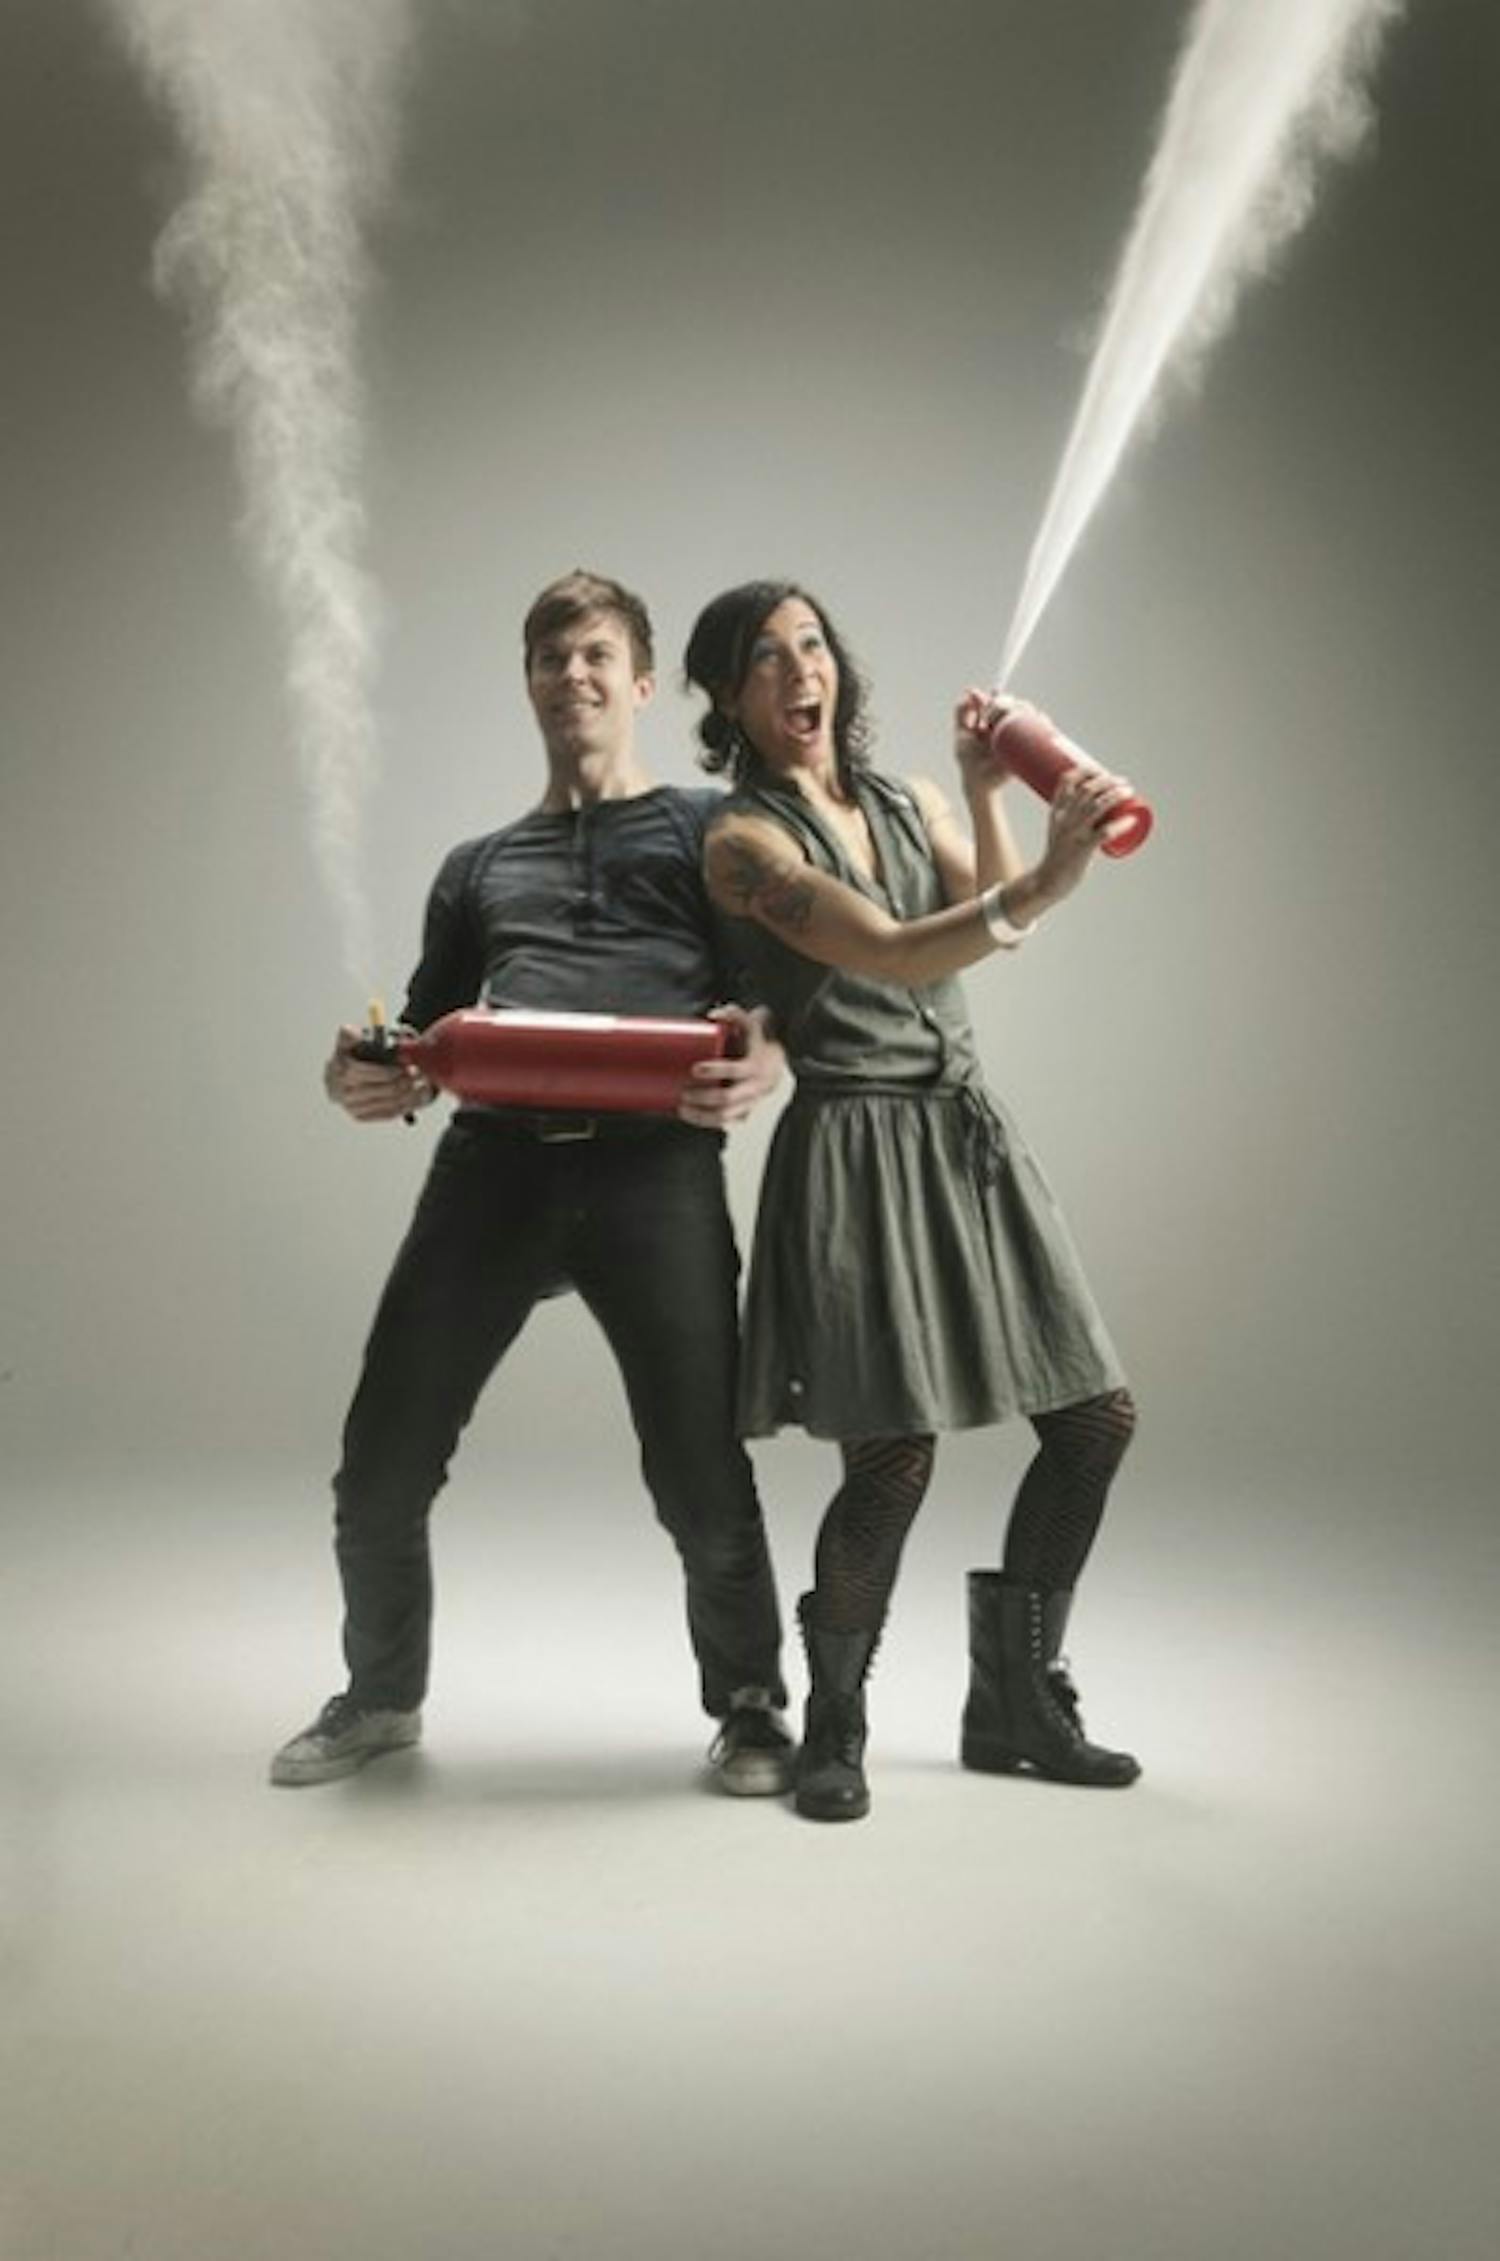 Dance punk duo Matt and Kim will be performing at DeLuna Fest on Friday.